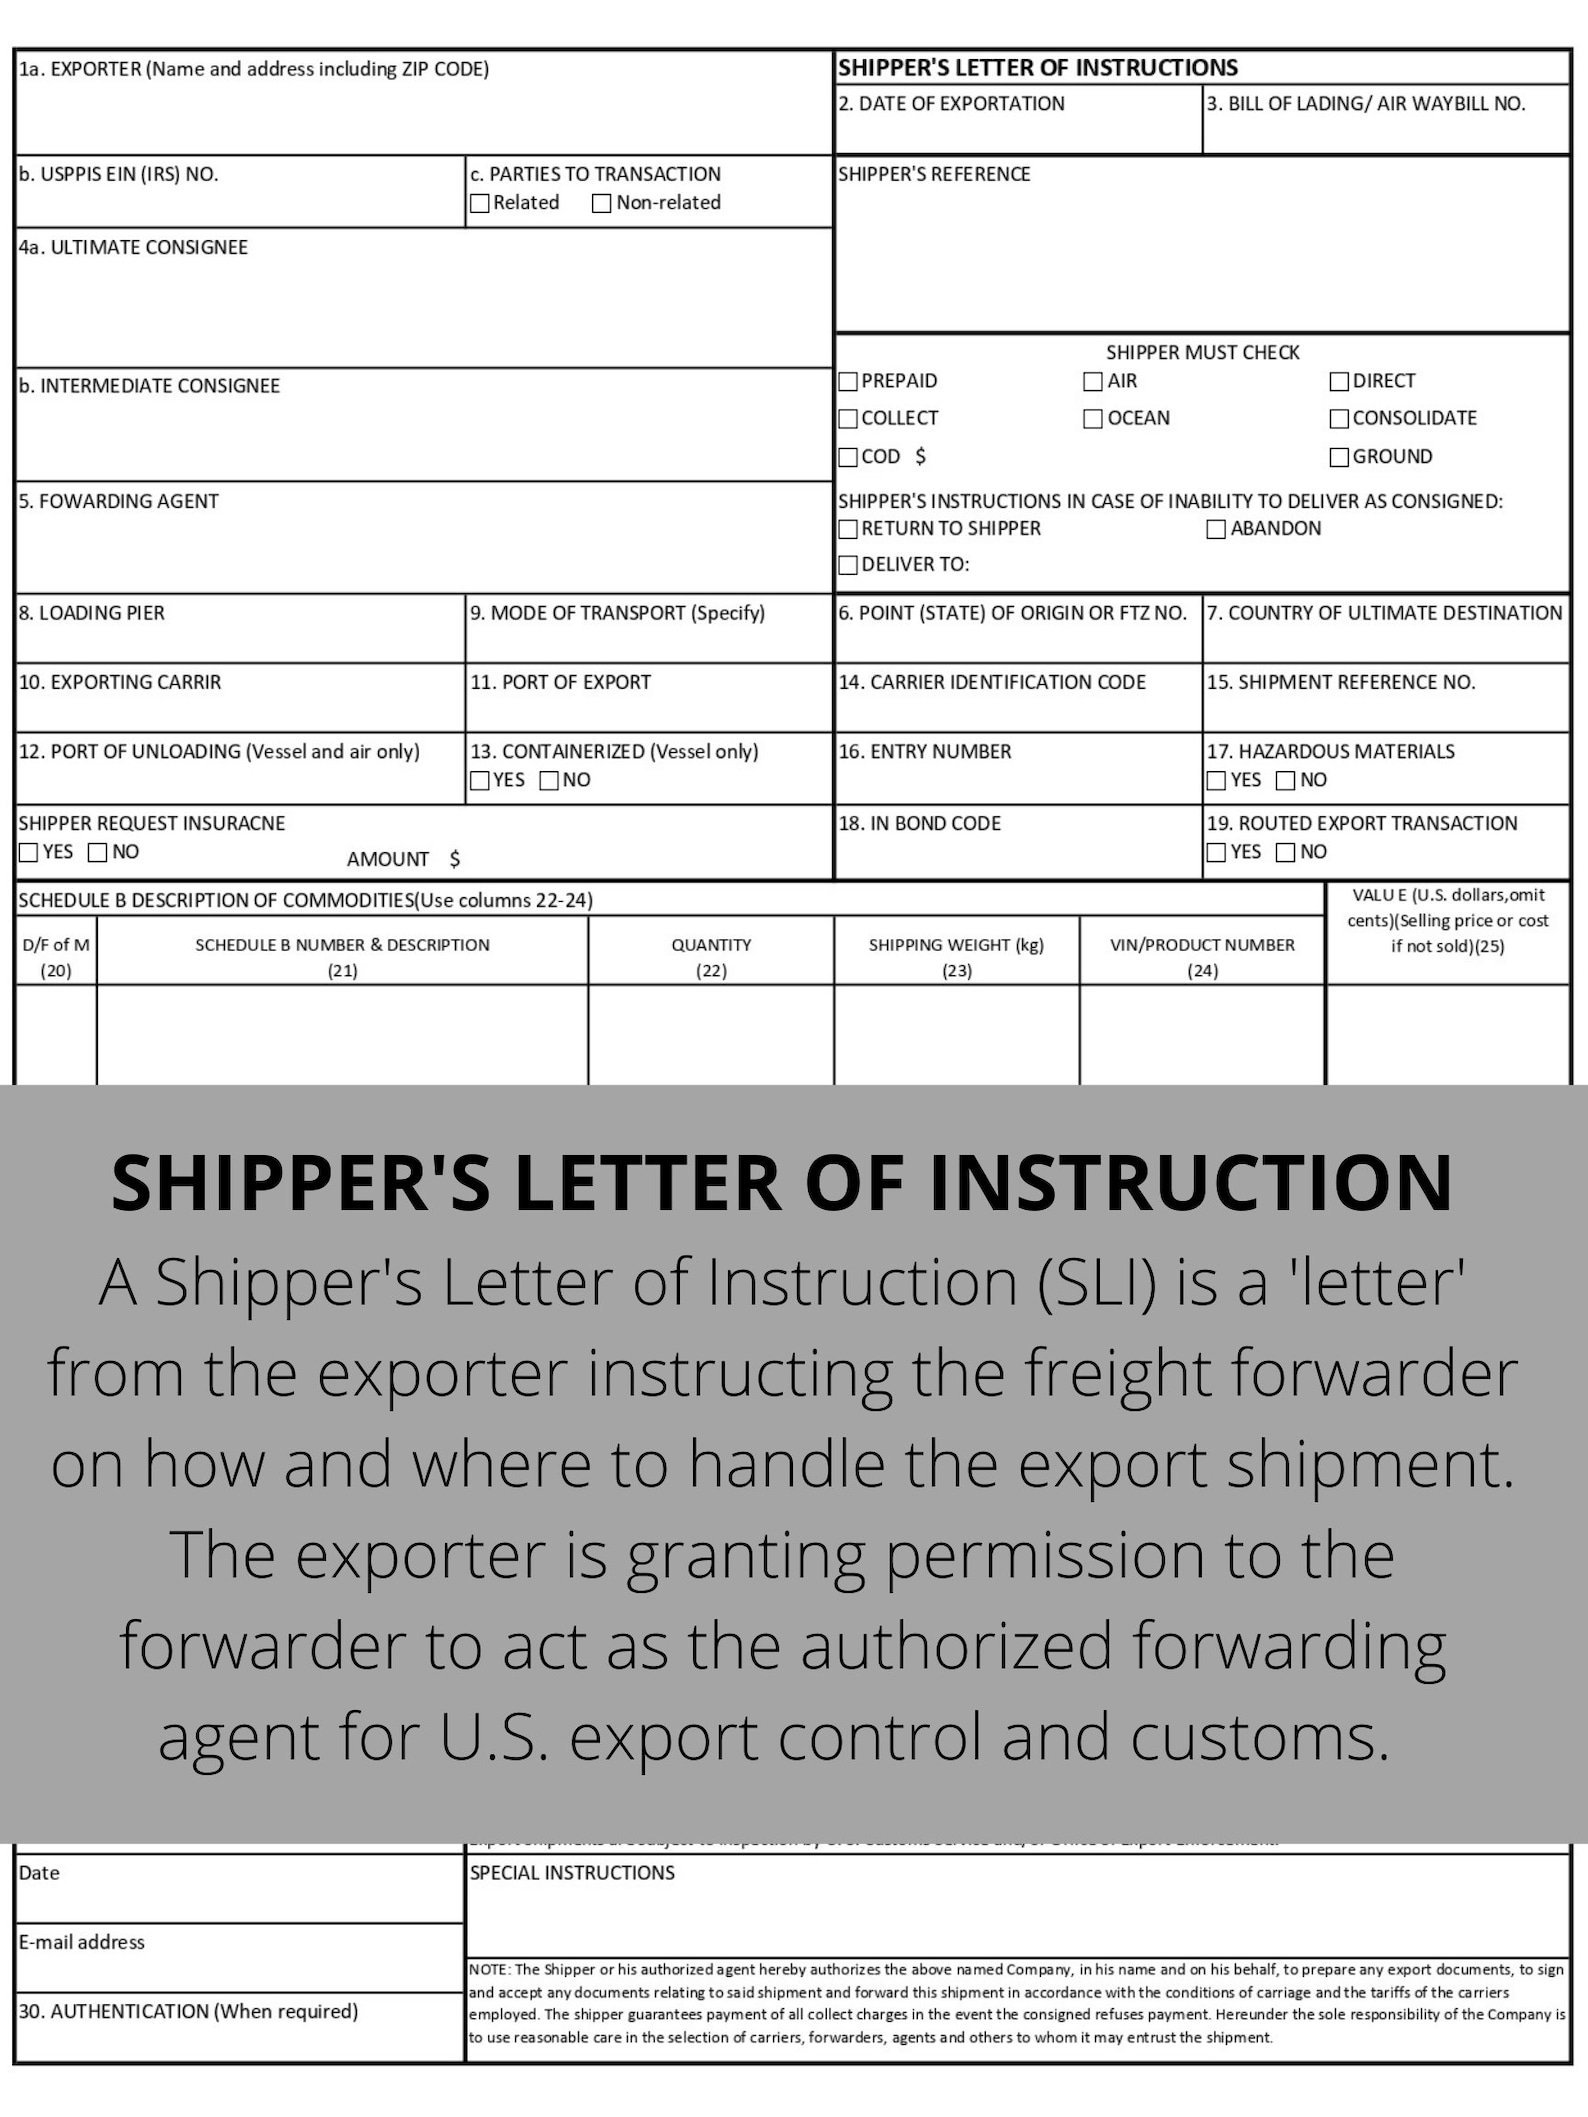 shipper s letter of instructions template